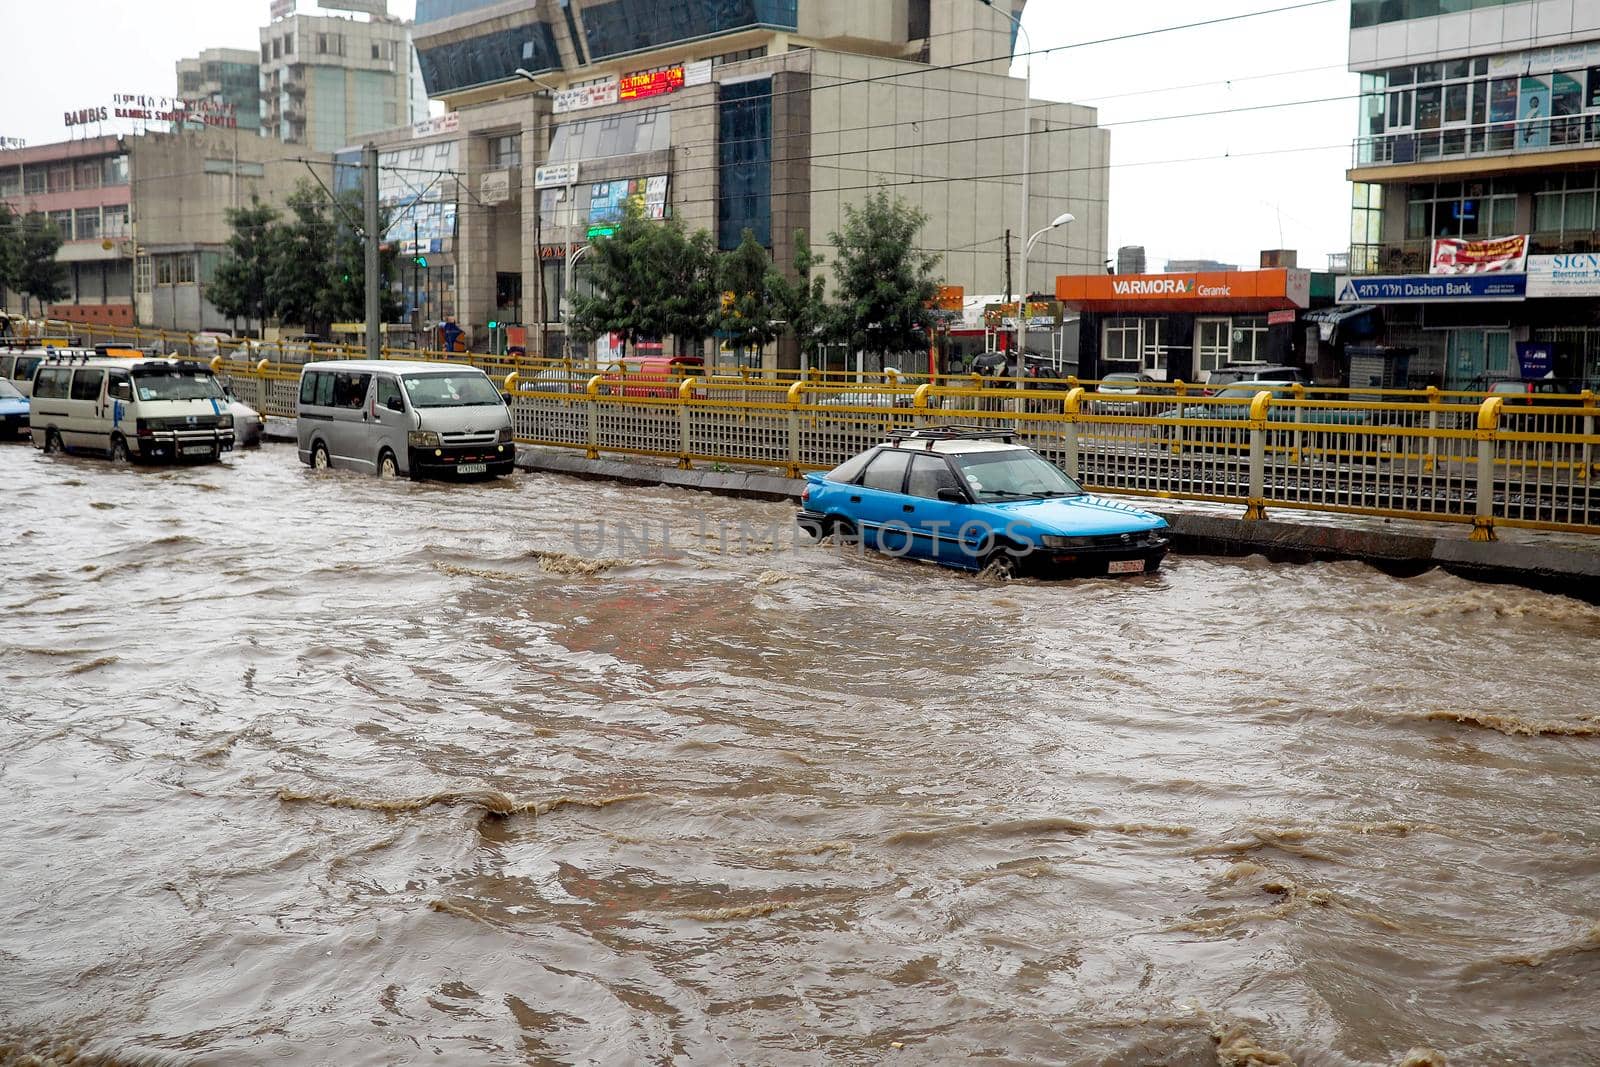 Addis Ababa, Ethiopia, 21 July 2019 : The rainy season brings floods to many African cities. by fivepointsix